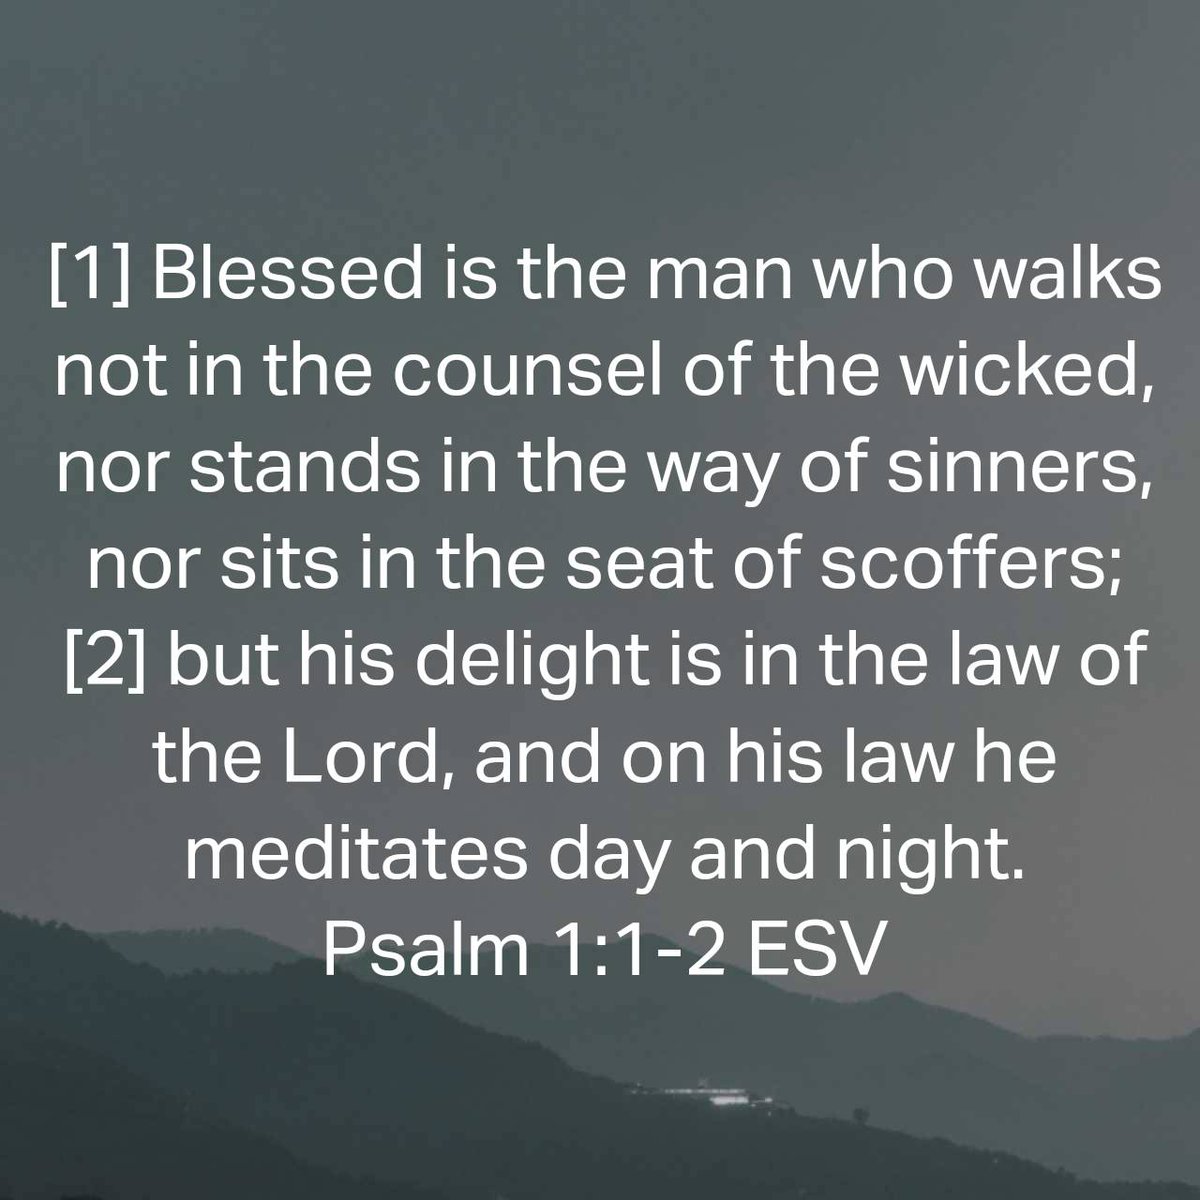 Psalm 1:1-2 ESV [1] Blessed is the man who walks not in the counsel of the wicked, nor stands in the way of sinners, nor sits in the seat of scoffers; [2] but his delight is in the law of the Lord, and on his law he meditates day and night. bible.com/bible/59/psa.1…